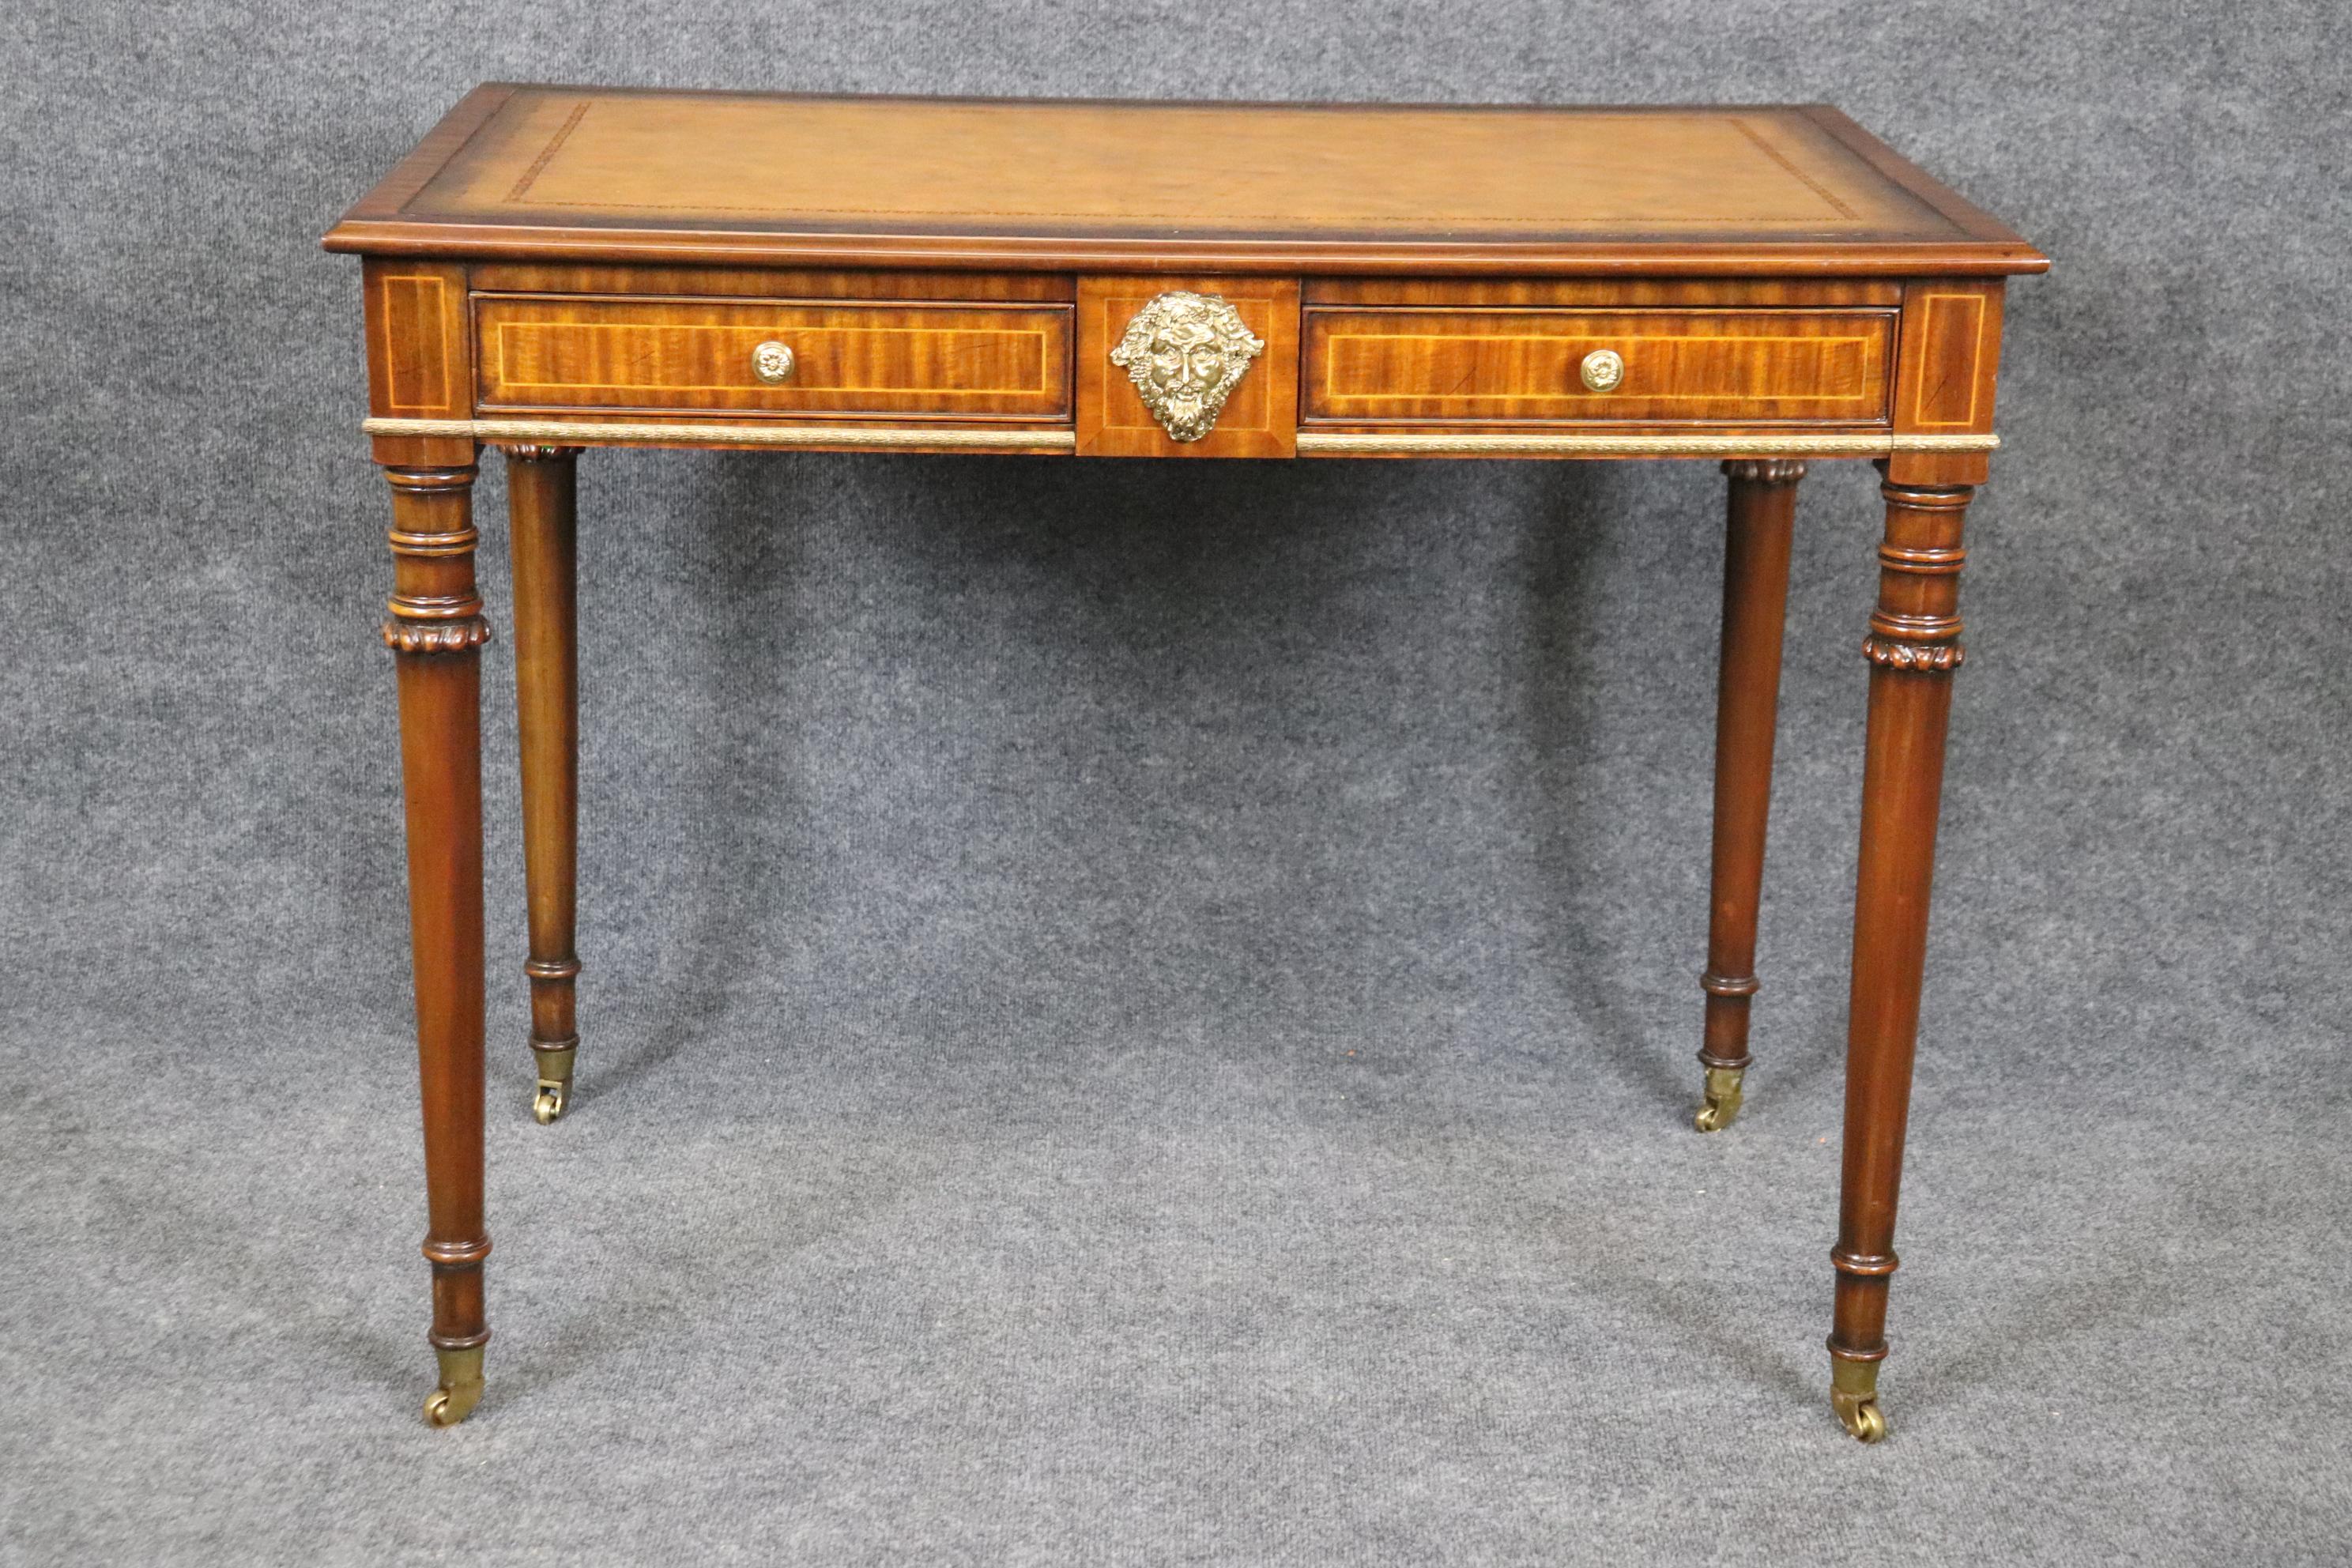 Contemporary Yellow Ochre Leather Top Maitland Smith Regency Mahogany Desk with Trays For Sale